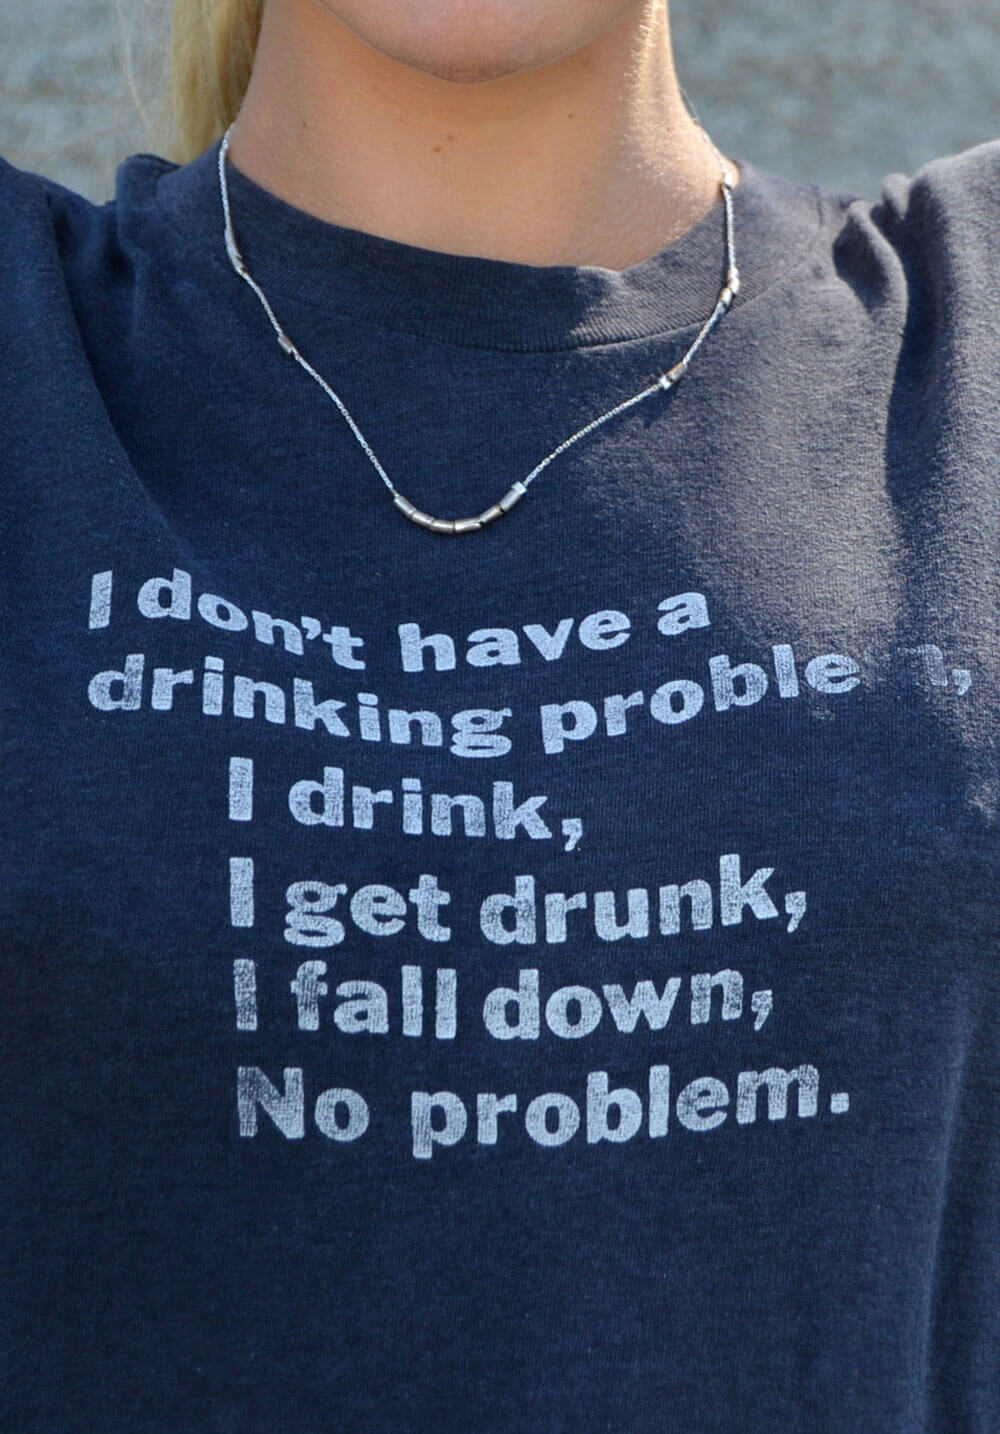 graphic tee - drinking problems - men's size small